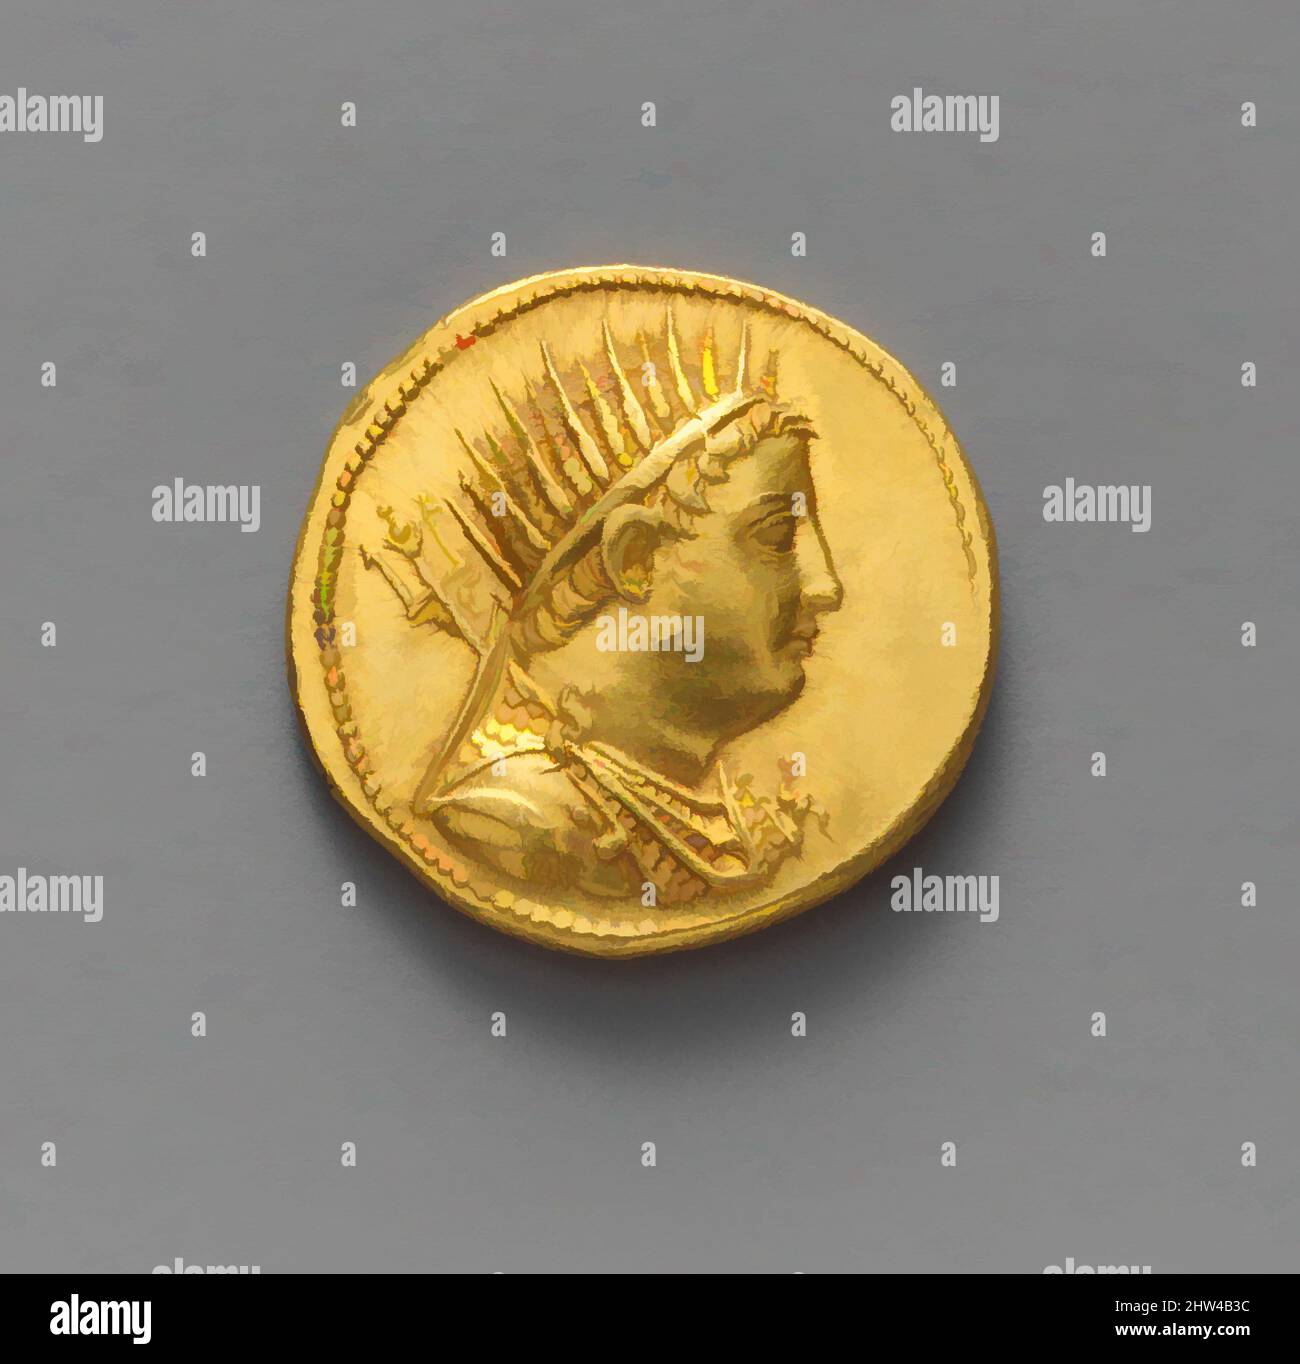 Art inspired by Gold oktadrachm of Ptolemy IV Philopator, Hellenistic, 221–204 B.C., Greek, Ptolemaic, Gold, 1 1/16 in., 0oz. (2.7 cm, 27.77g), Coins, head of Ptolemy III, Euergetes/double cornucopiae, minted in Alexandria, Egypt. Gold and silver were the primary raw materials for, Classic works modernized by Artotop with a splash of modernity. Shapes, color and value, eye-catching visual impact on art. Emotions through freedom of artworks in a contemporary way. A timeless message pursuing a wildly creative new direction. Artists turning to the digital medium and creating the Artotop NFT Stock Photo